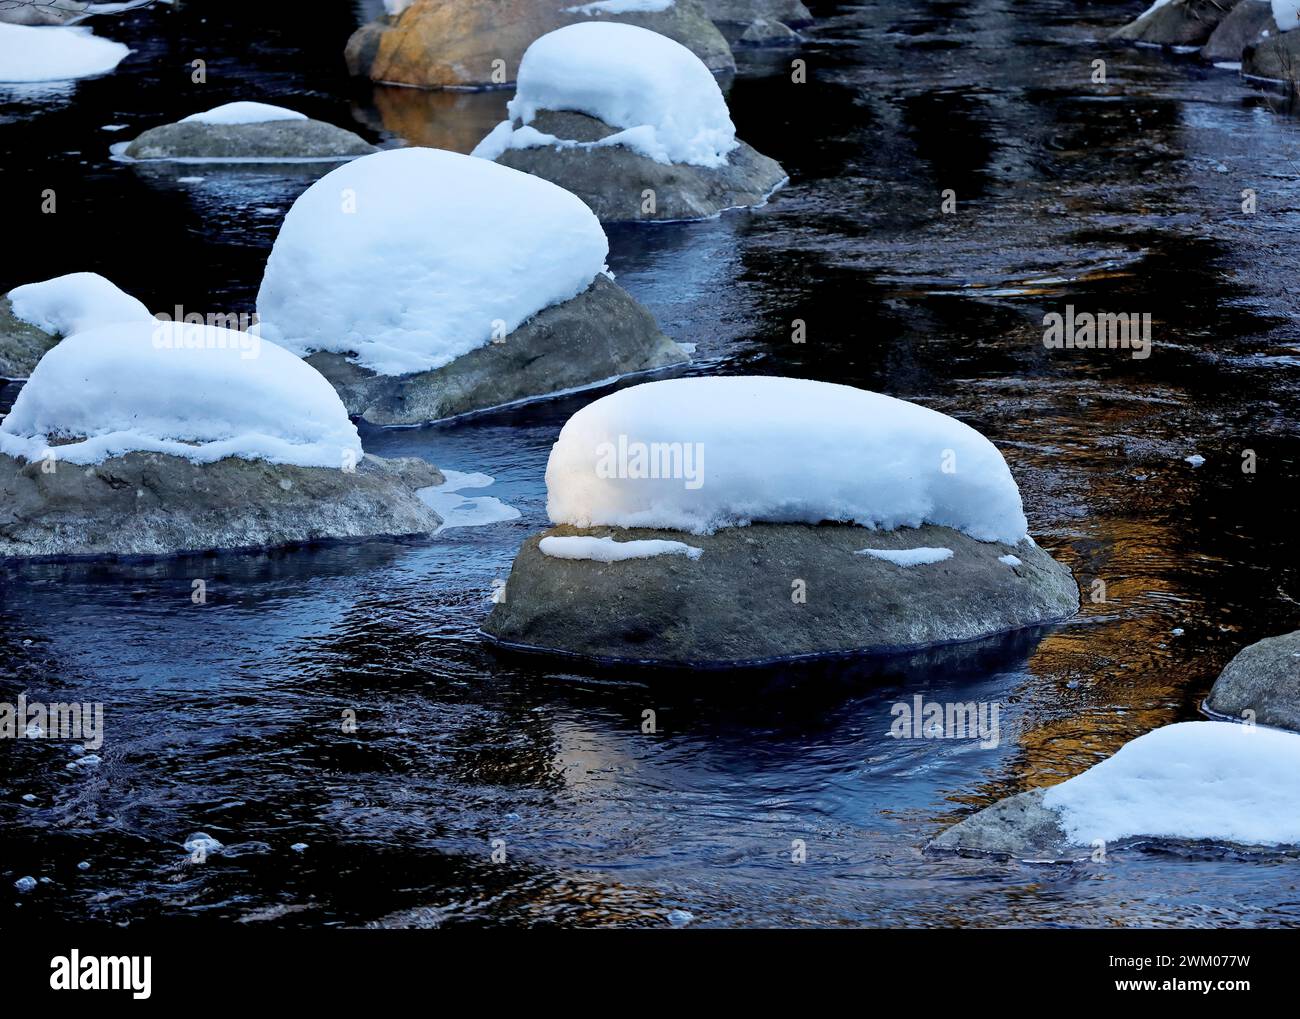 Snow covered stones in a river at daylight Stock Photo